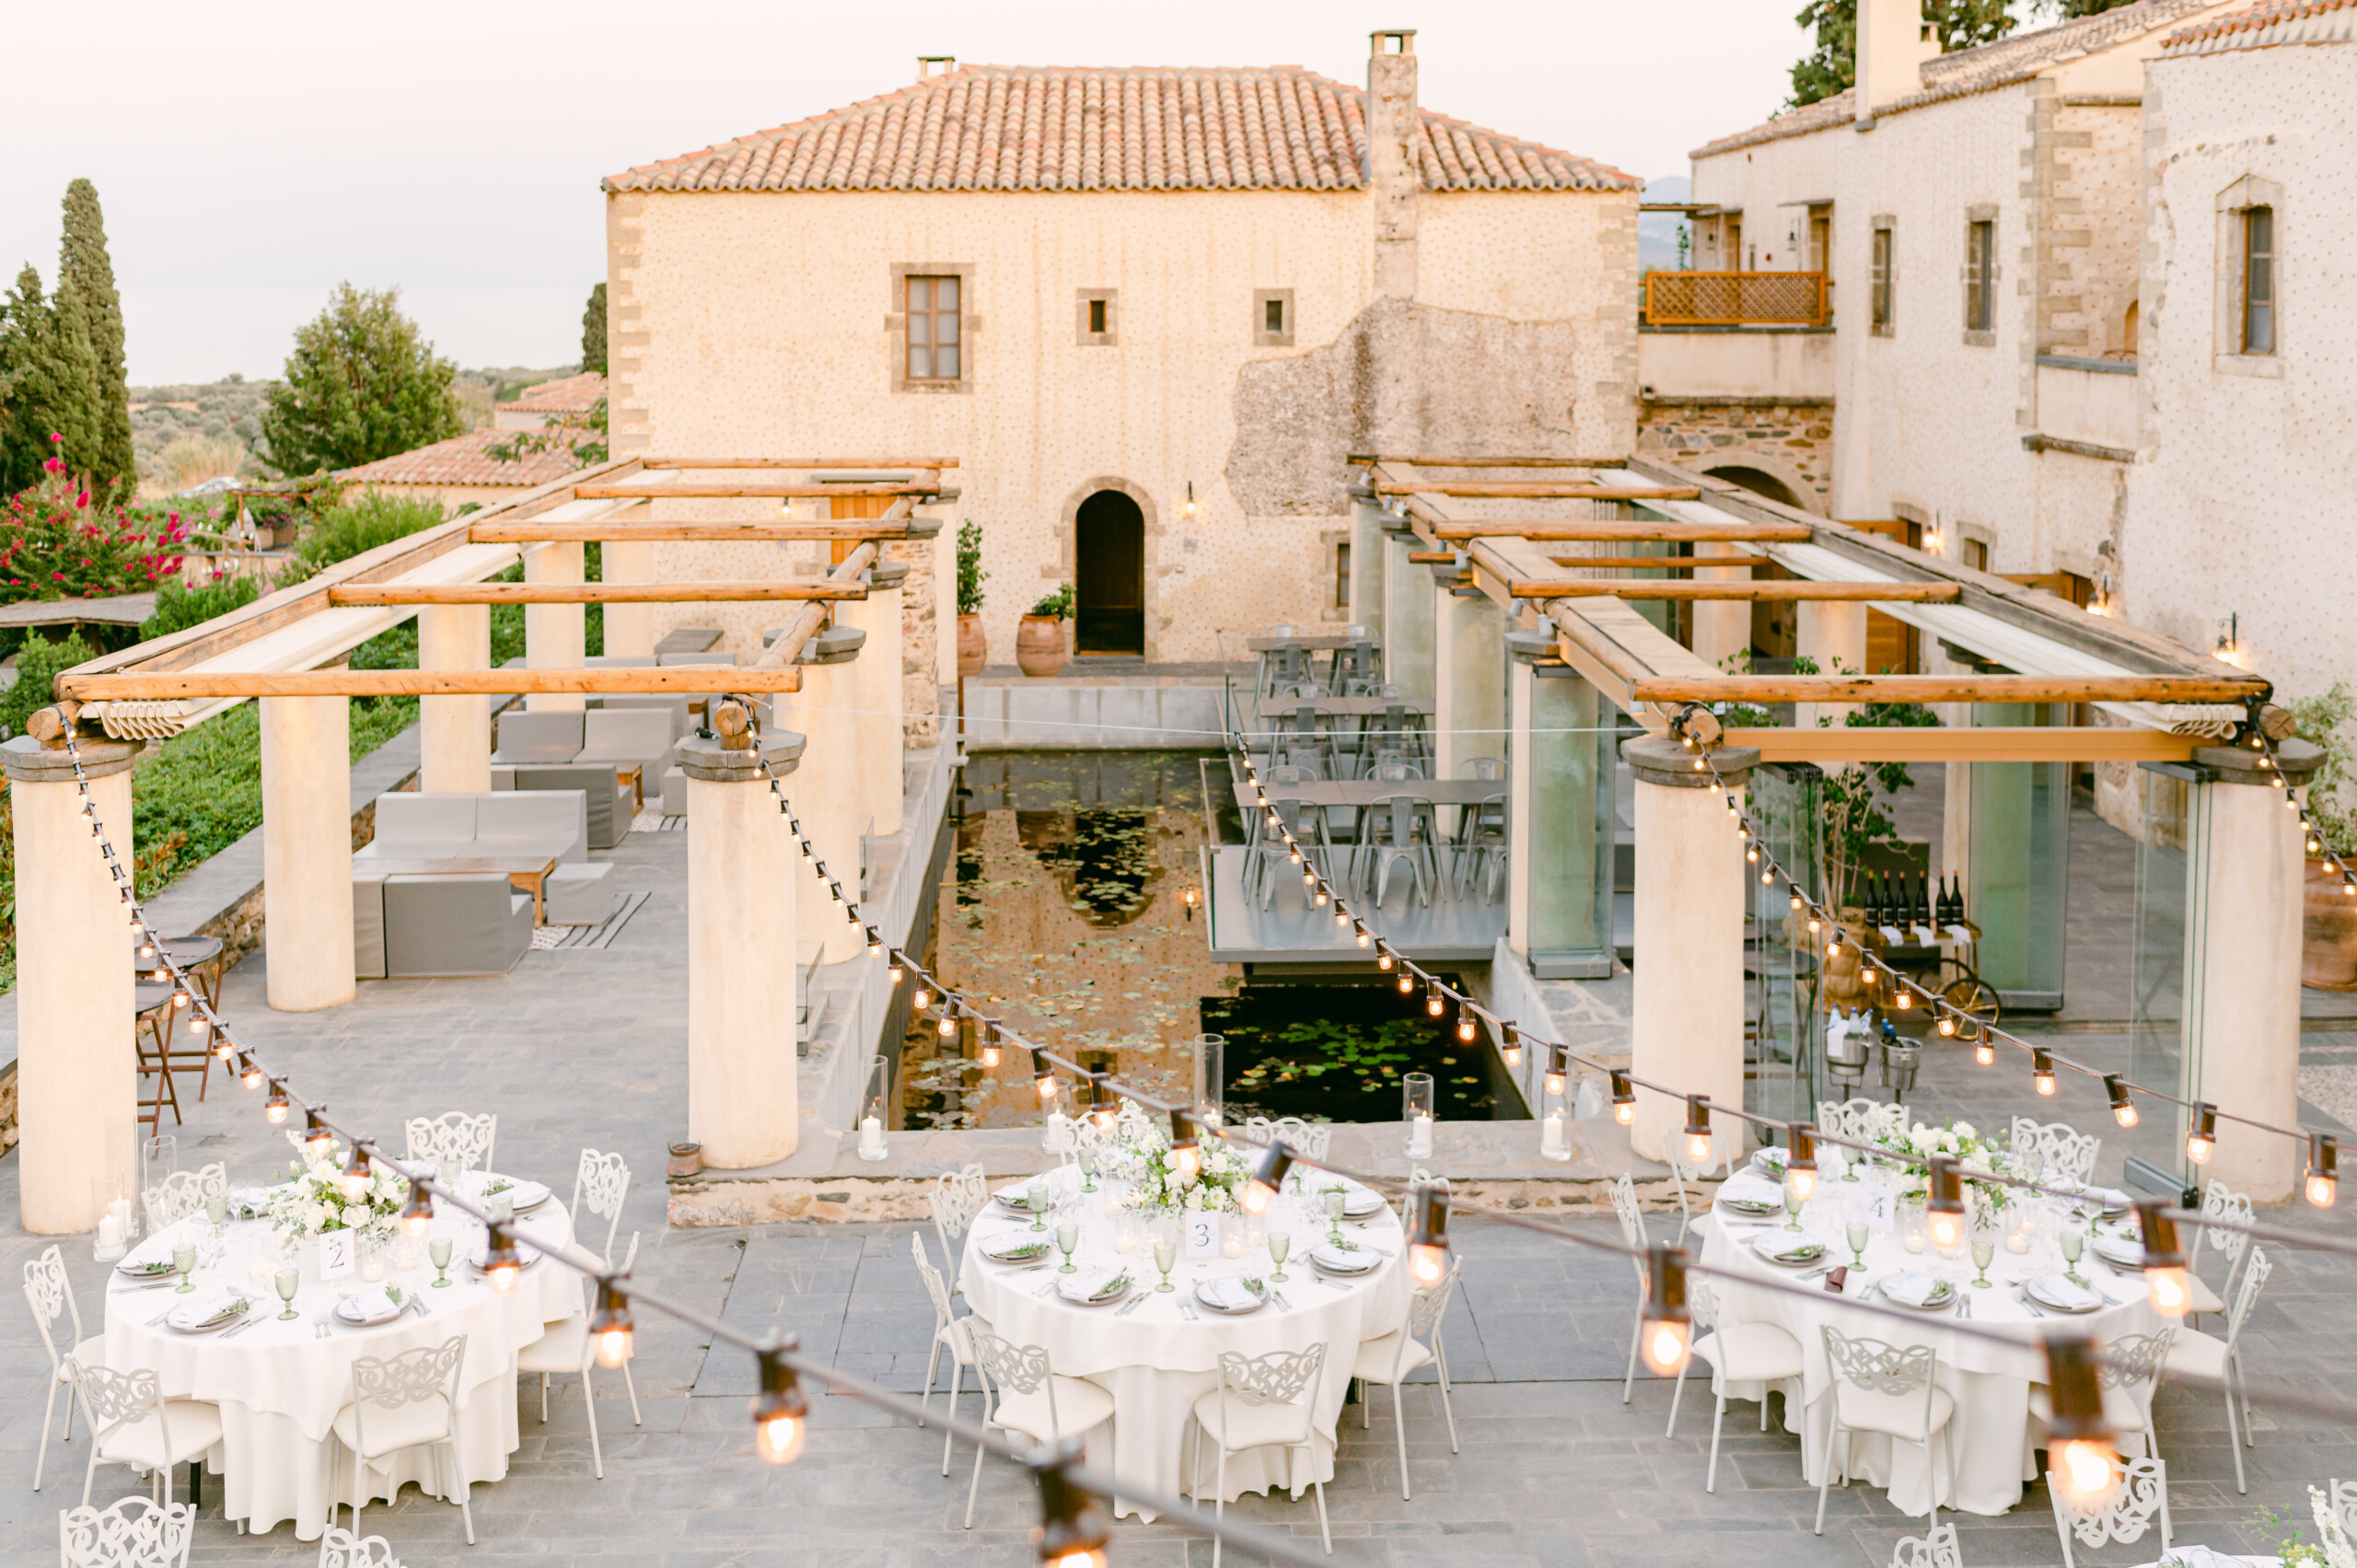 The scene is set at Kinsterna Hotel, for a fairytale wedding in Monemvasia